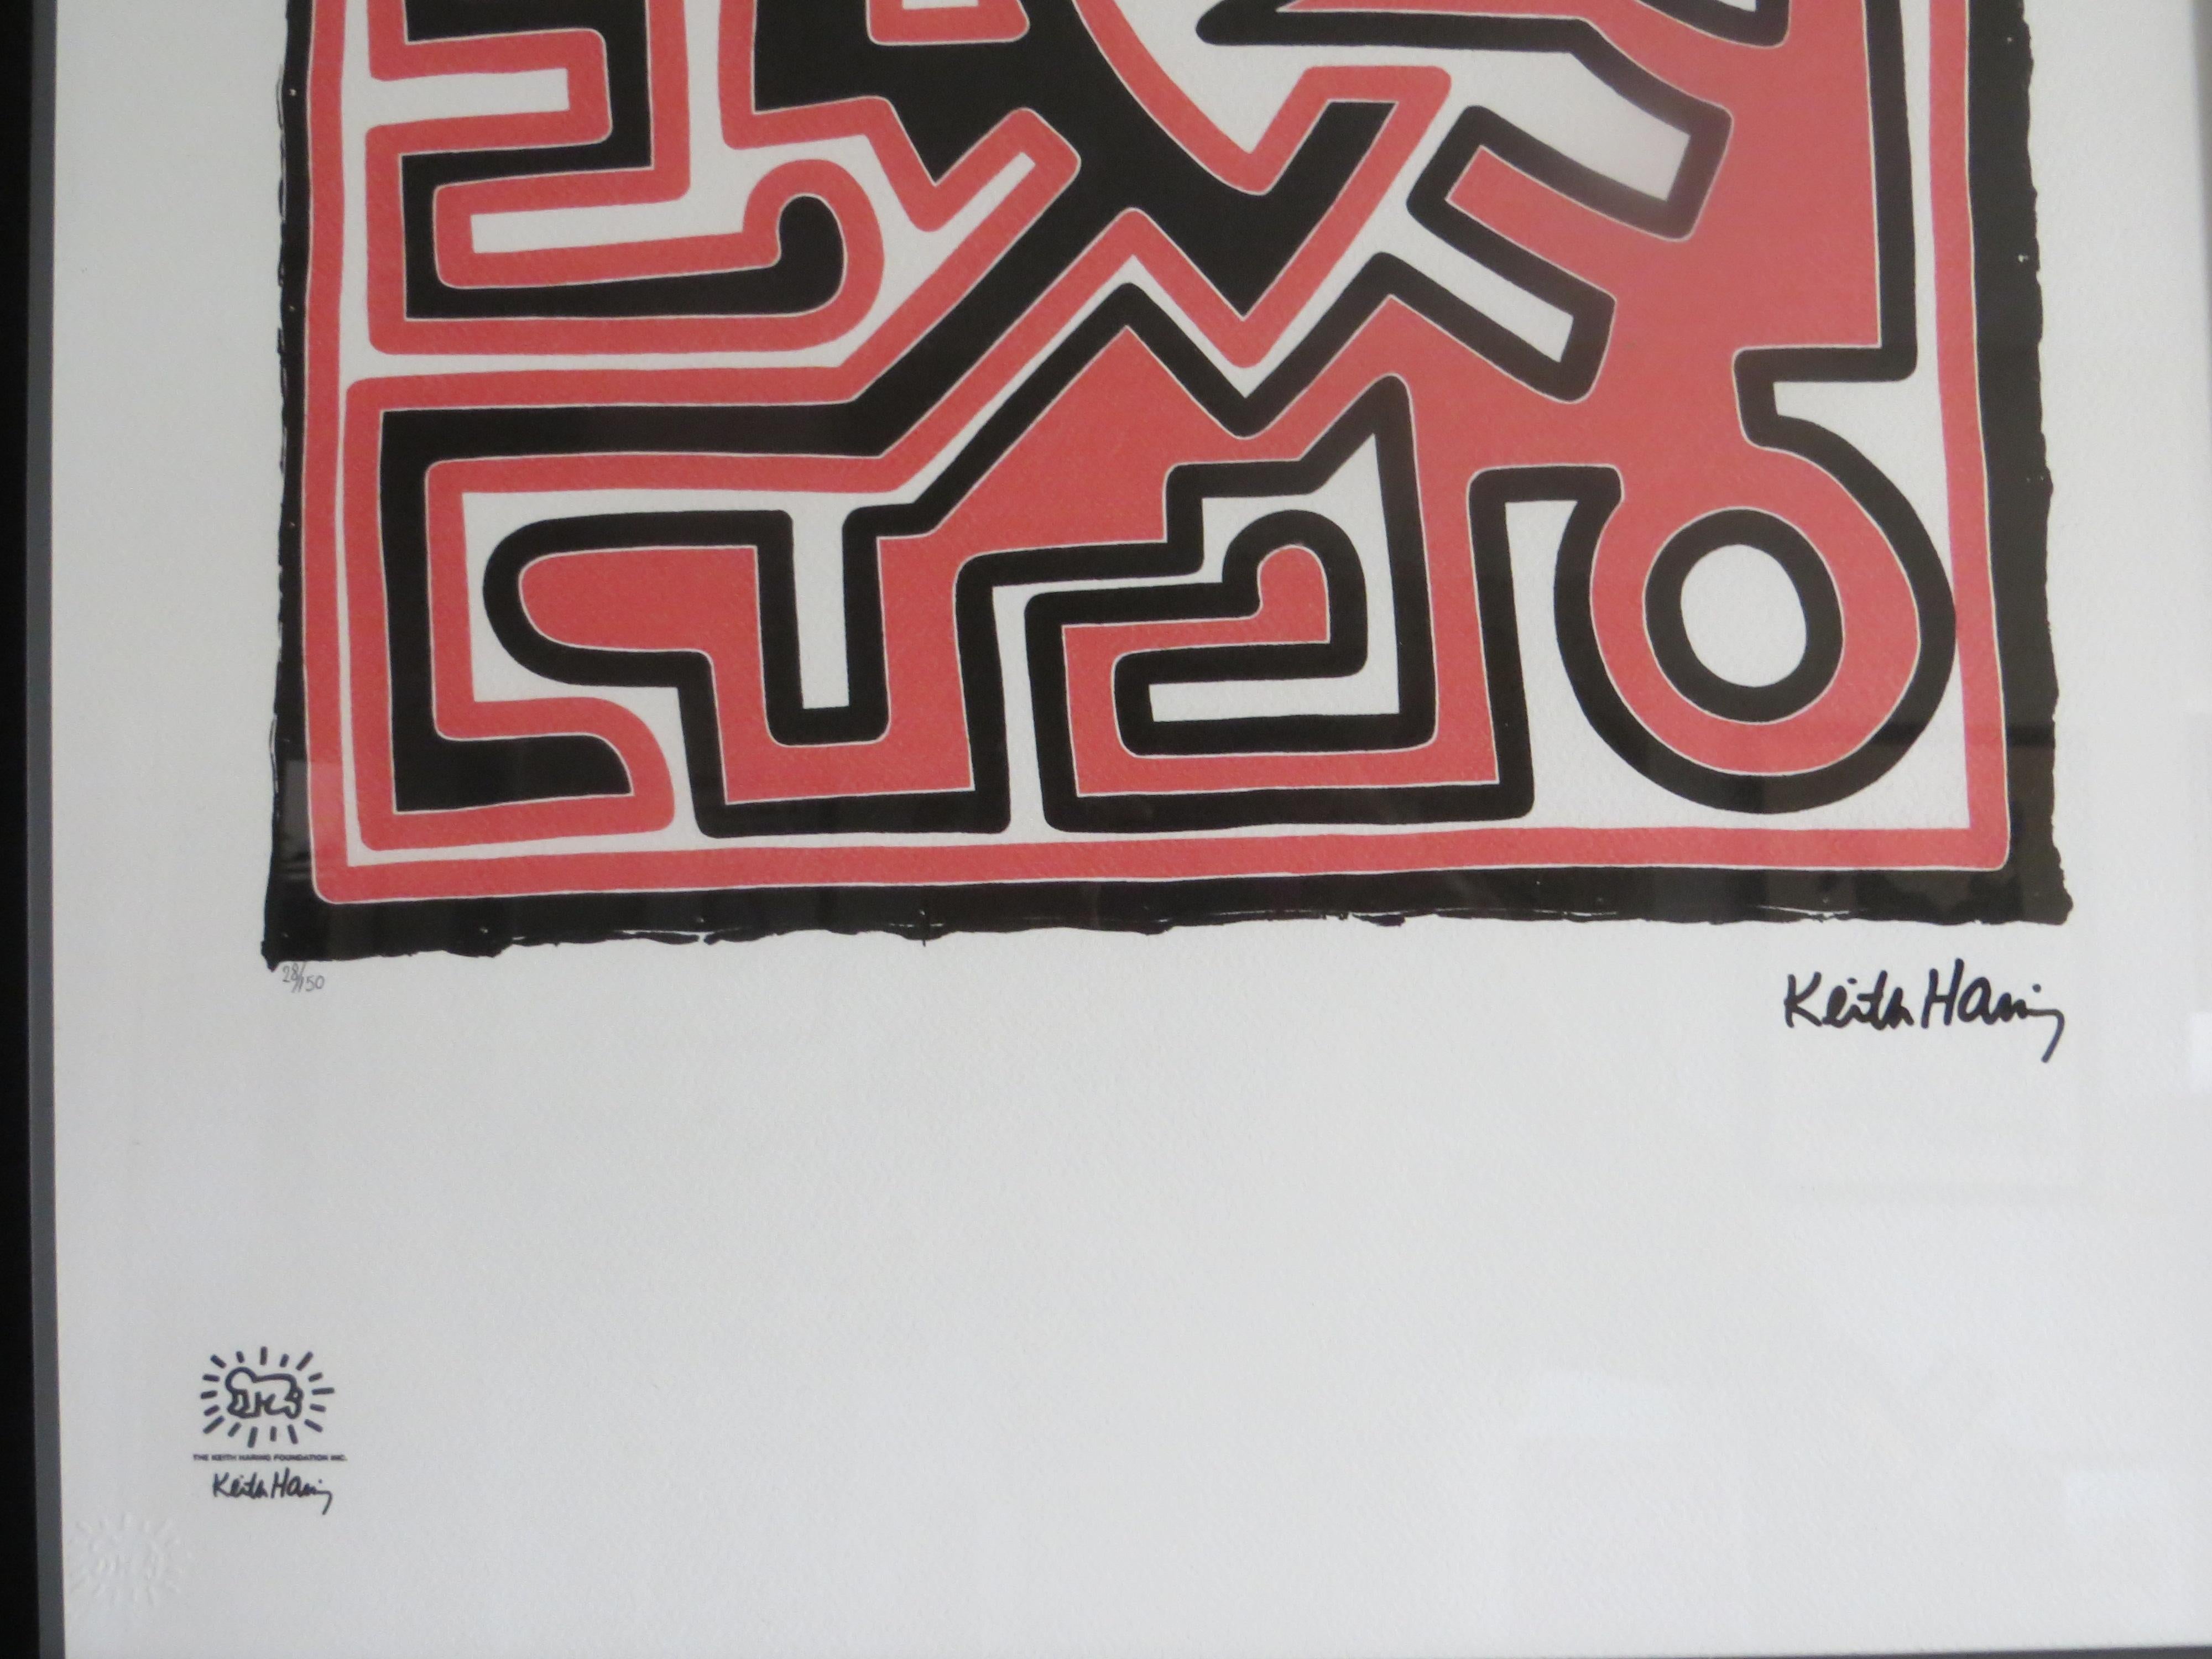   After Keith Haring,  Lithograph, Numbered  28/150 - Print by (after) Keith Haring